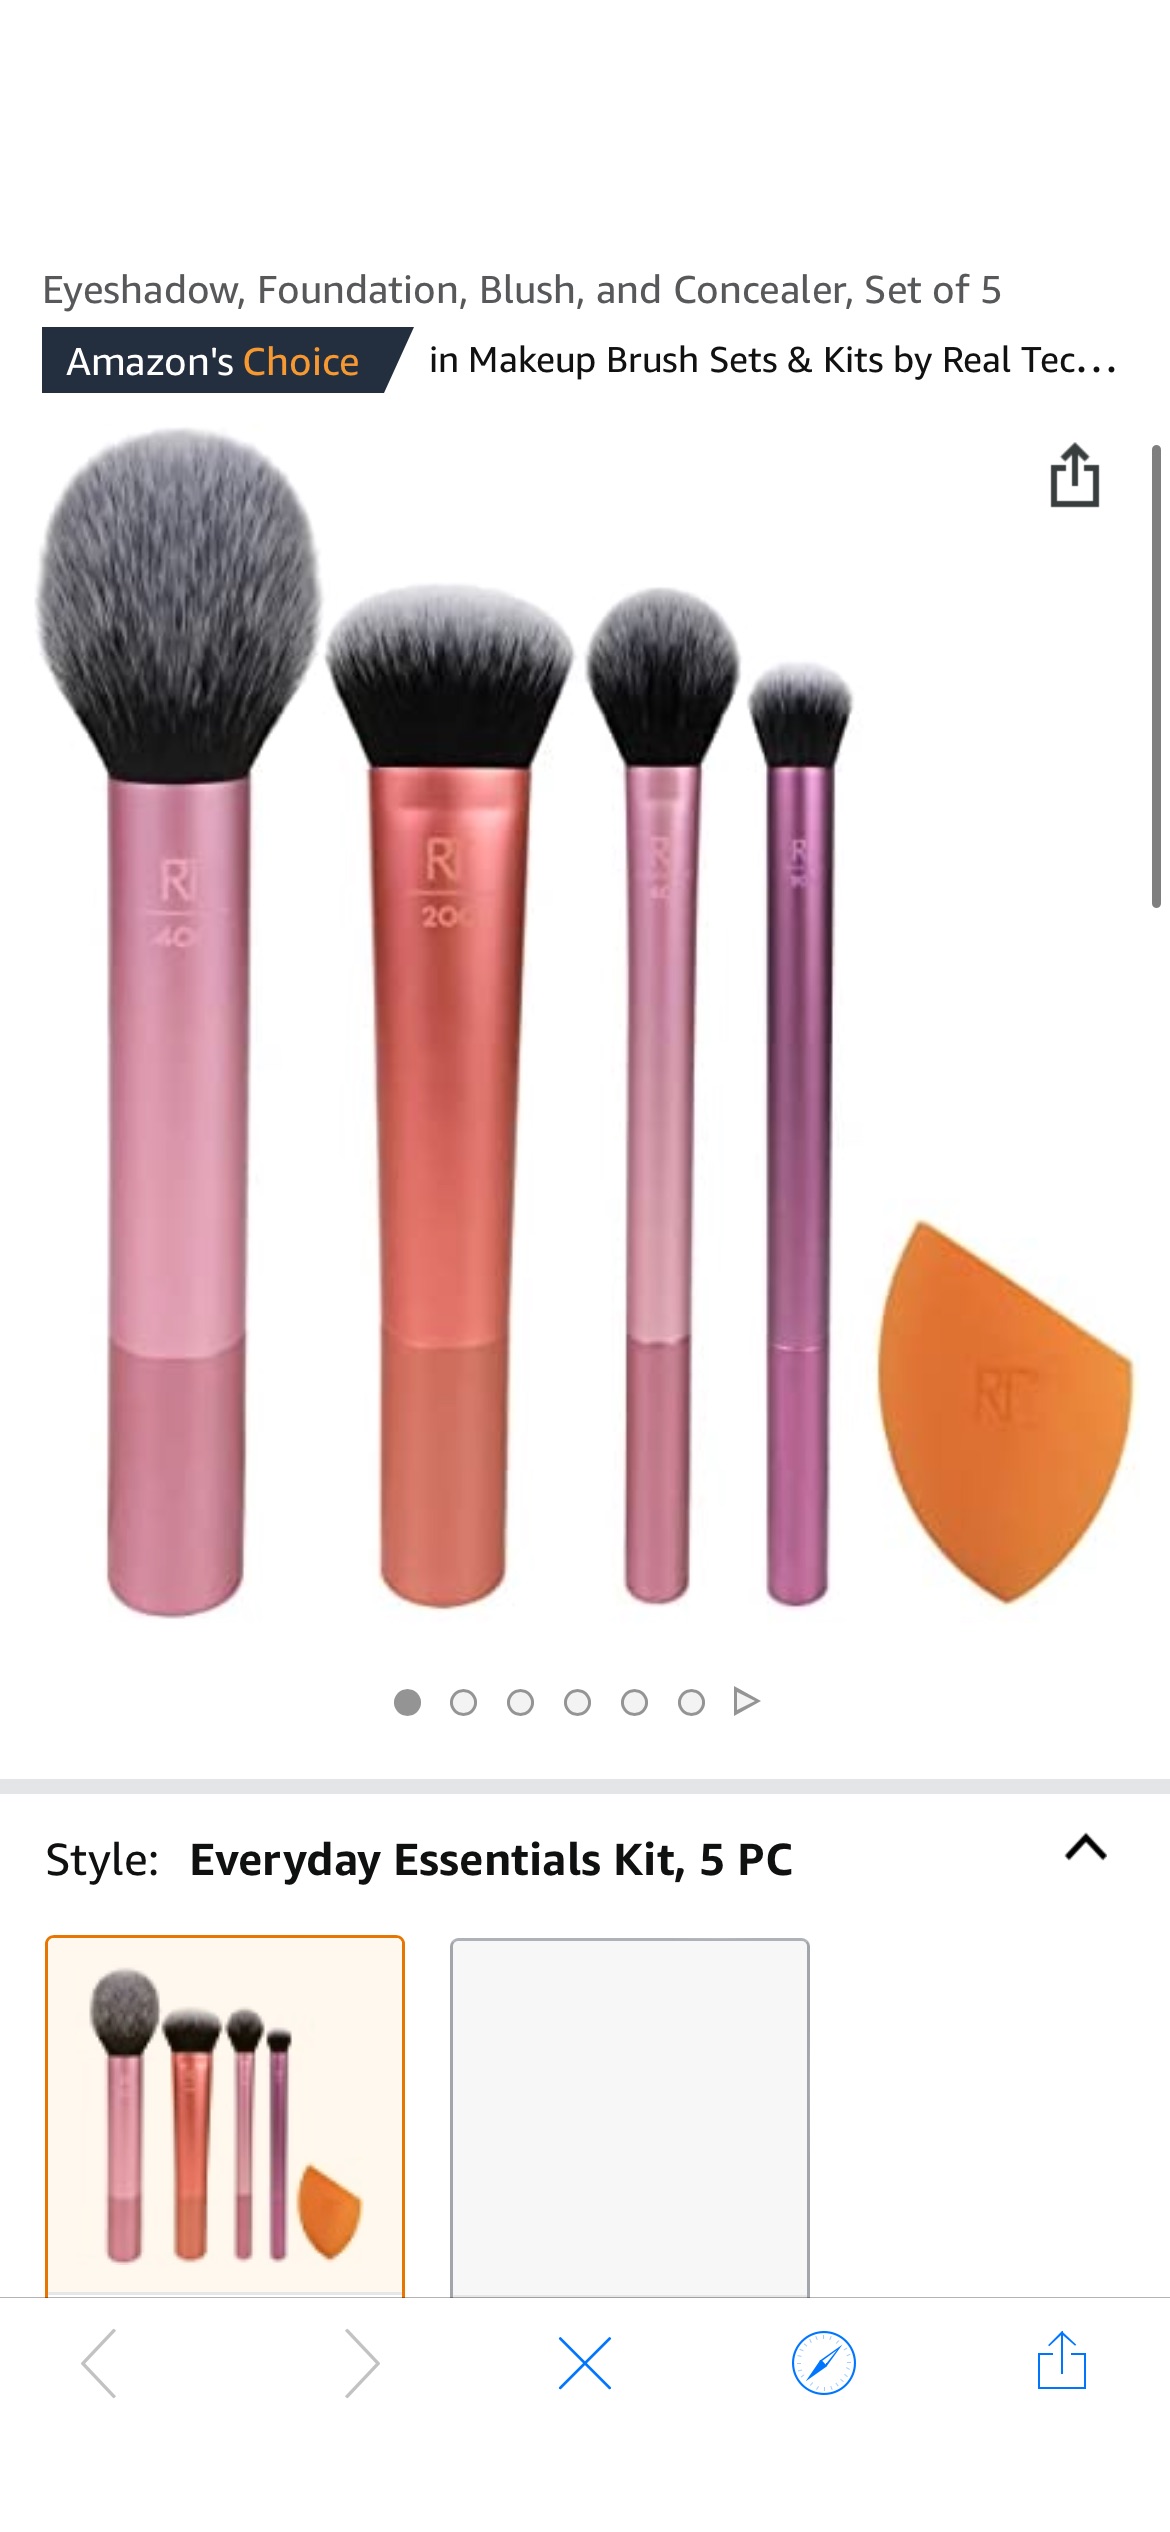 Amazon.com: Real Techniques Makeup Brush Set with Sponge Blender for Eyeshadow, Foundation, Blush, and Concealer, Set of 5